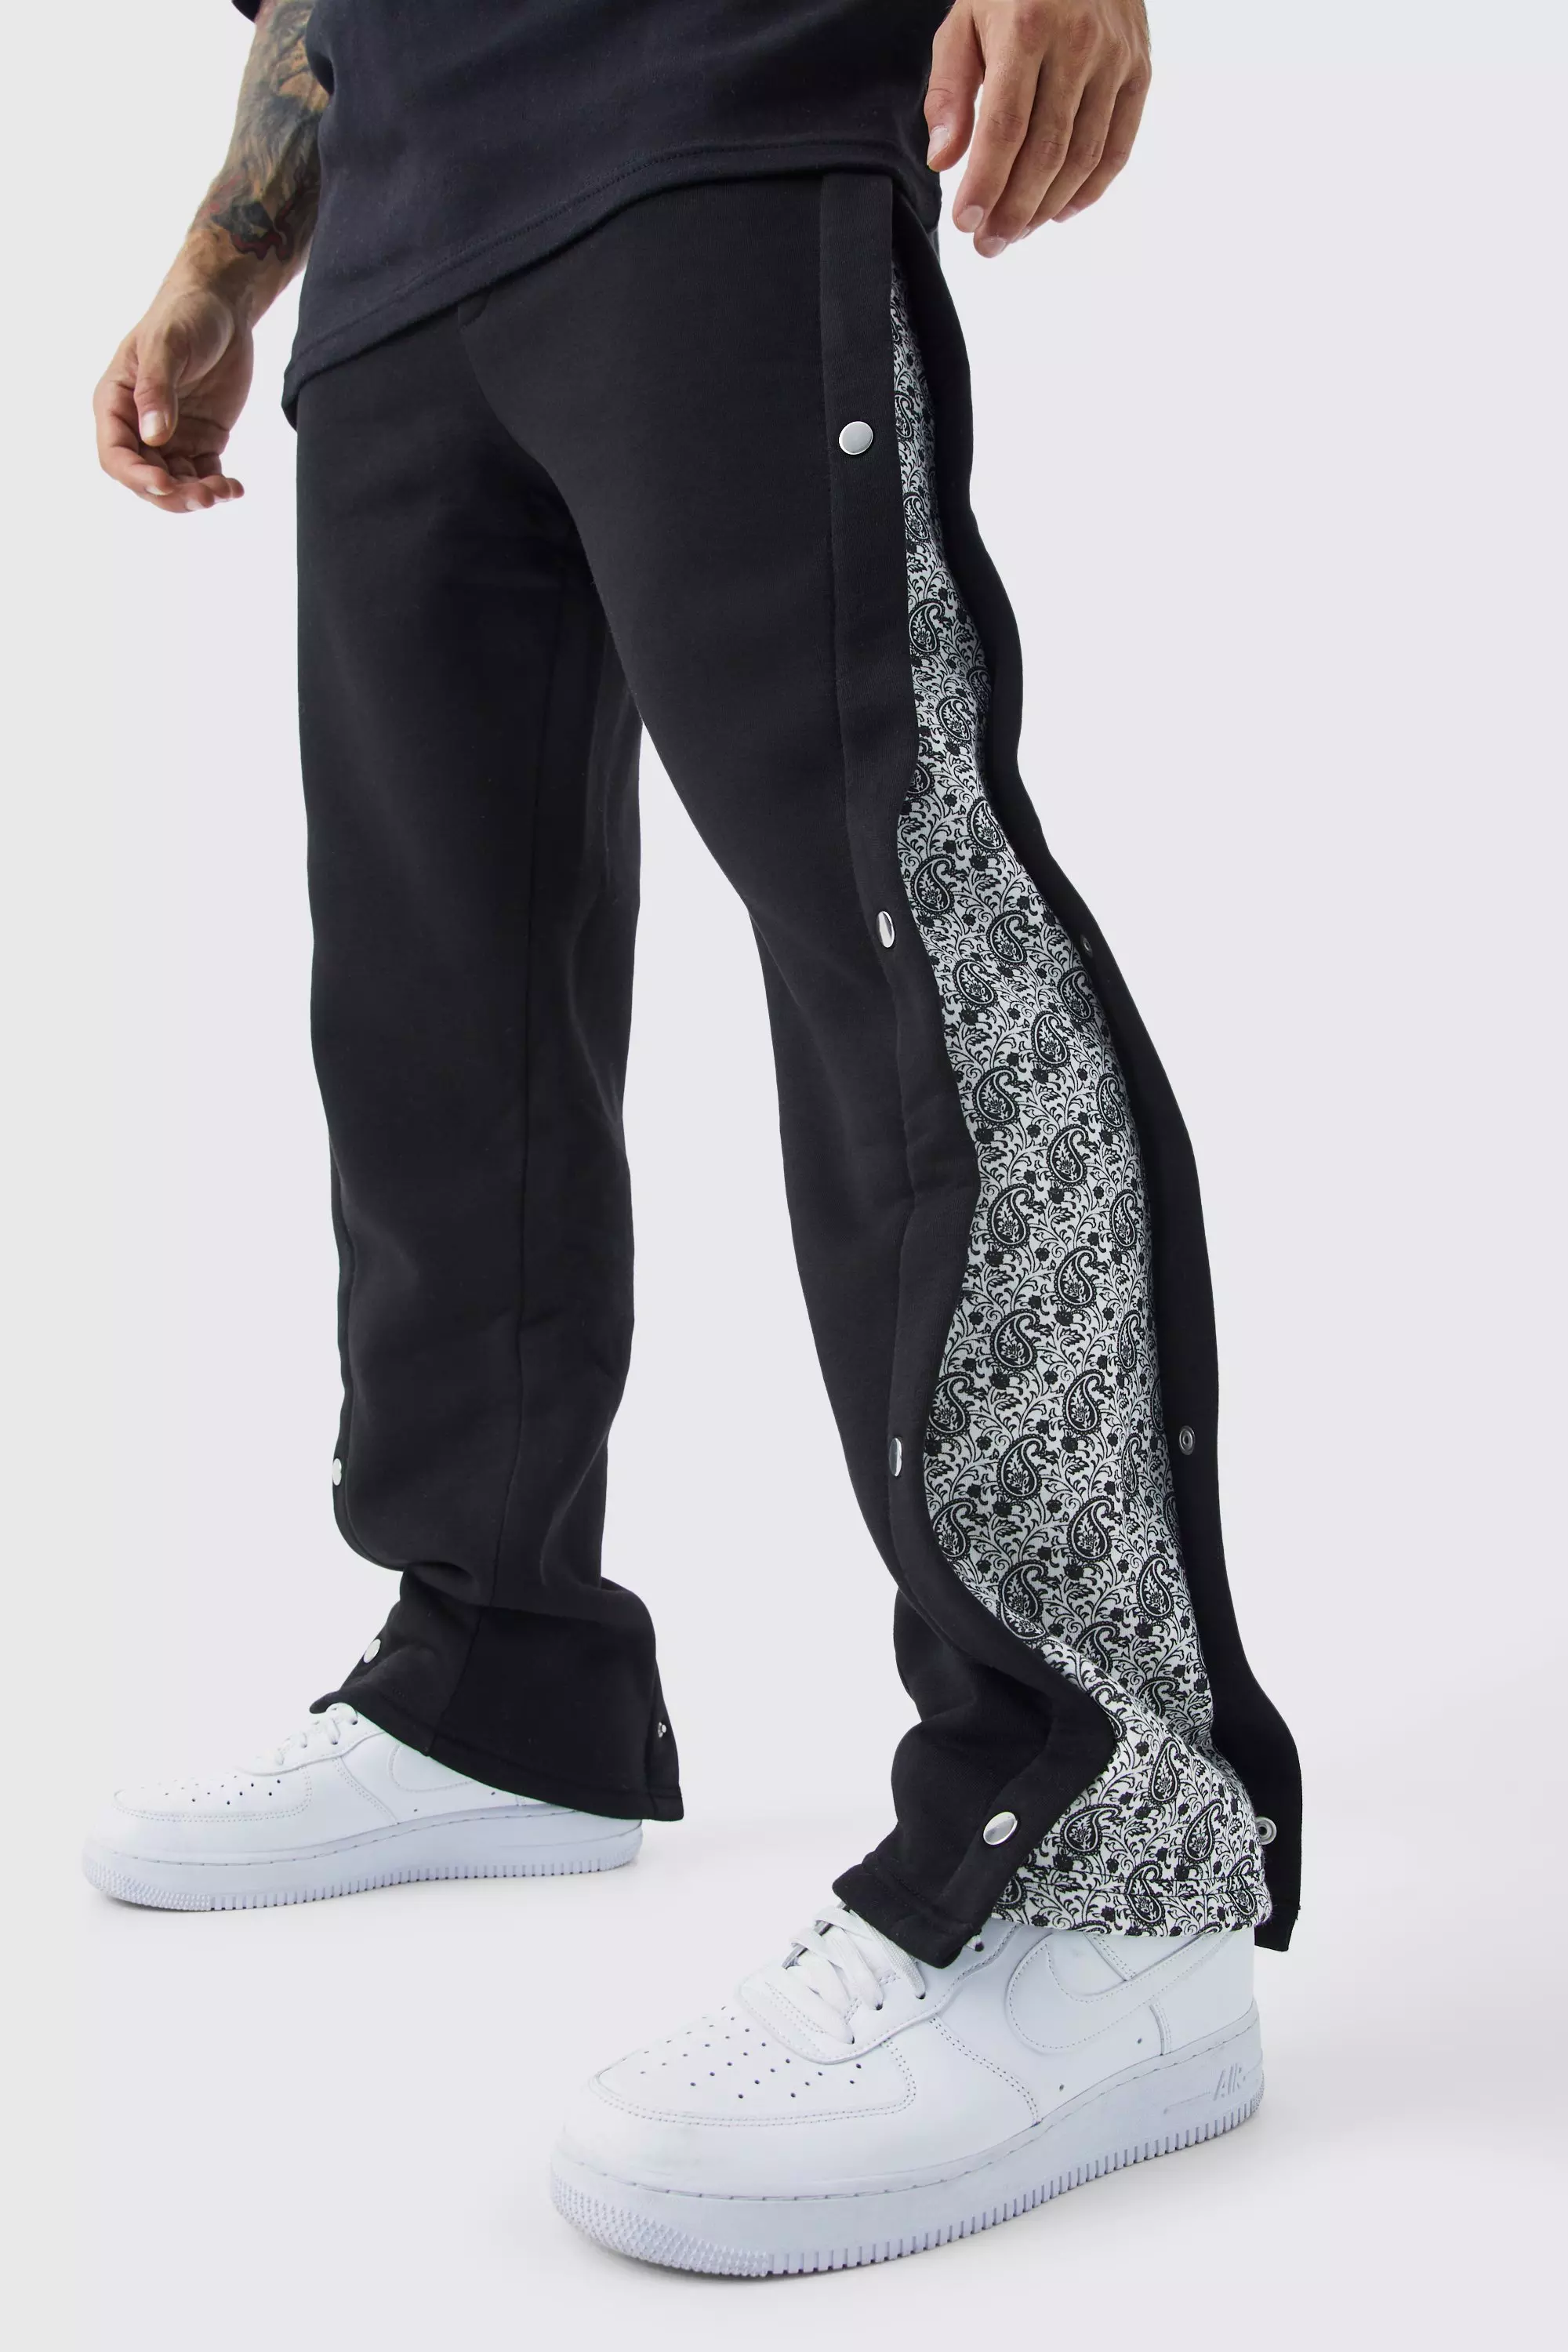 Relaxed Printed Side Panel Popper Sweatpants Black